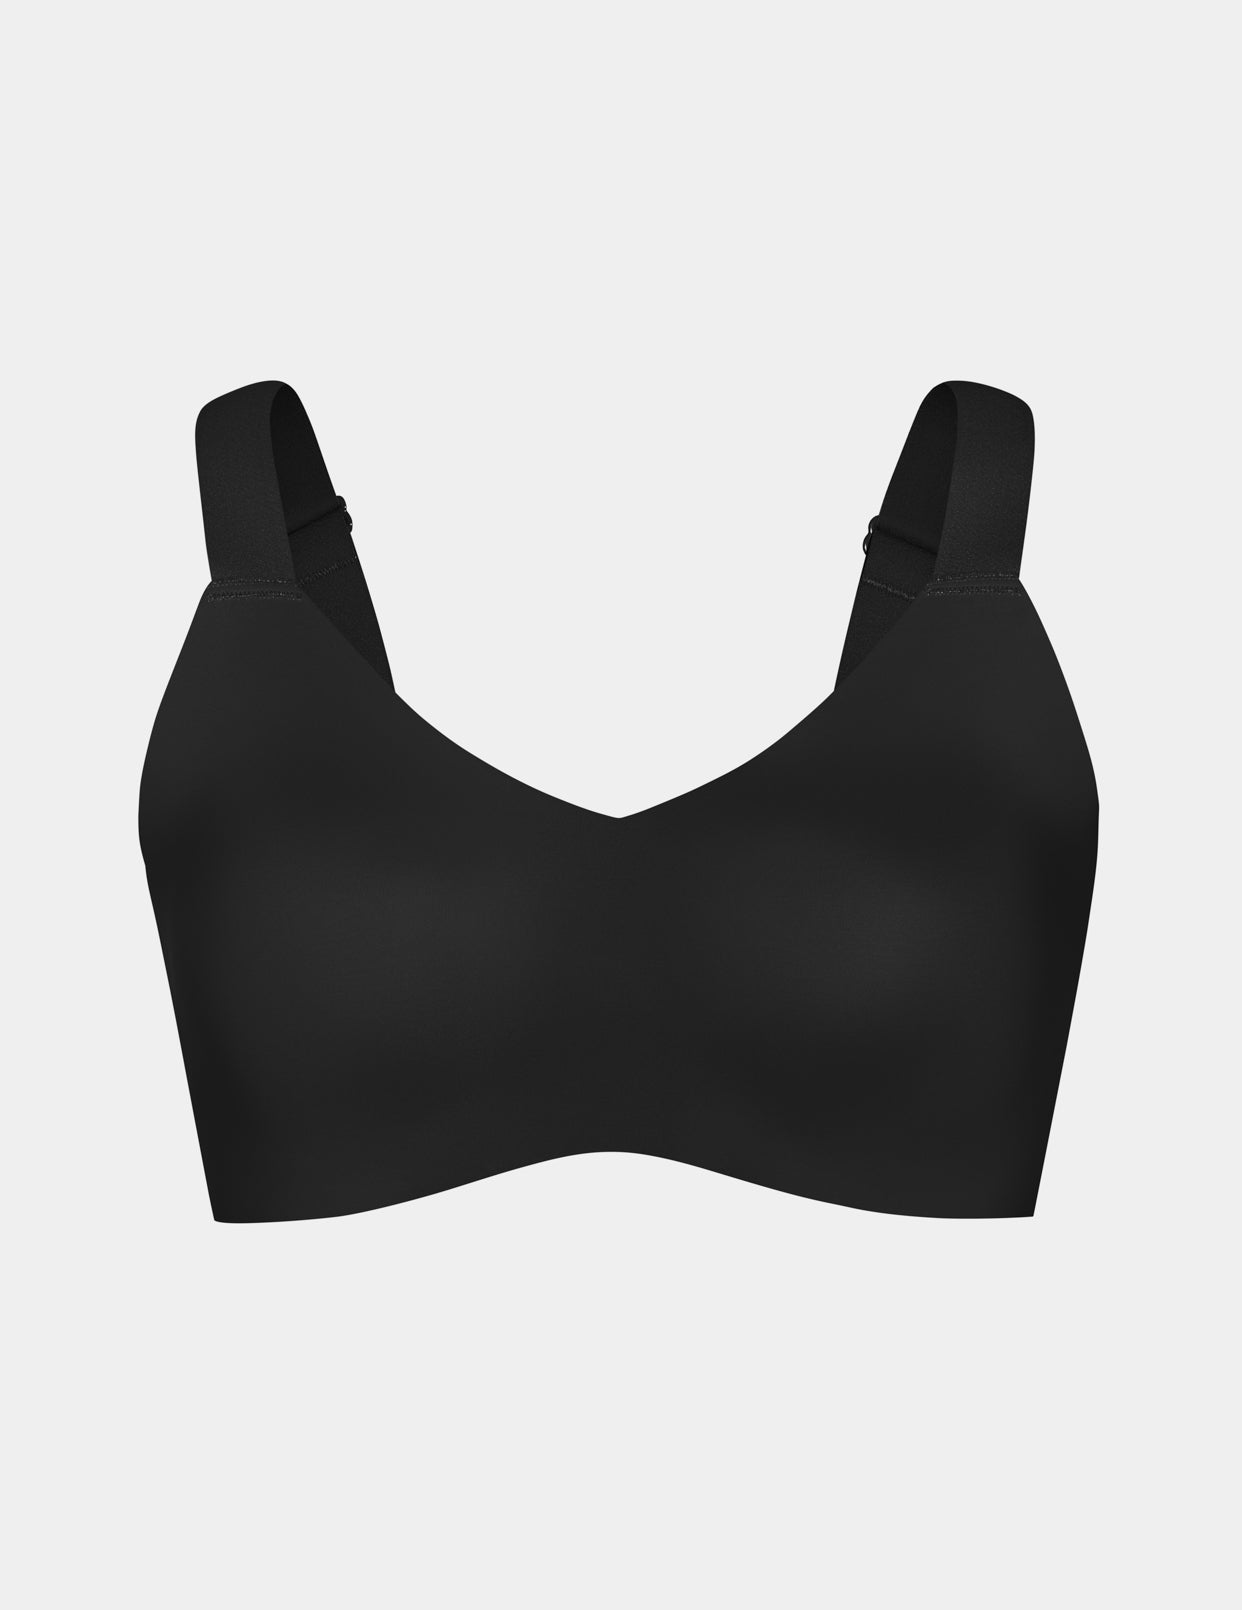 Knix LuxeLift Pullover Bra Black Size XL - $29 (50% Off Retail